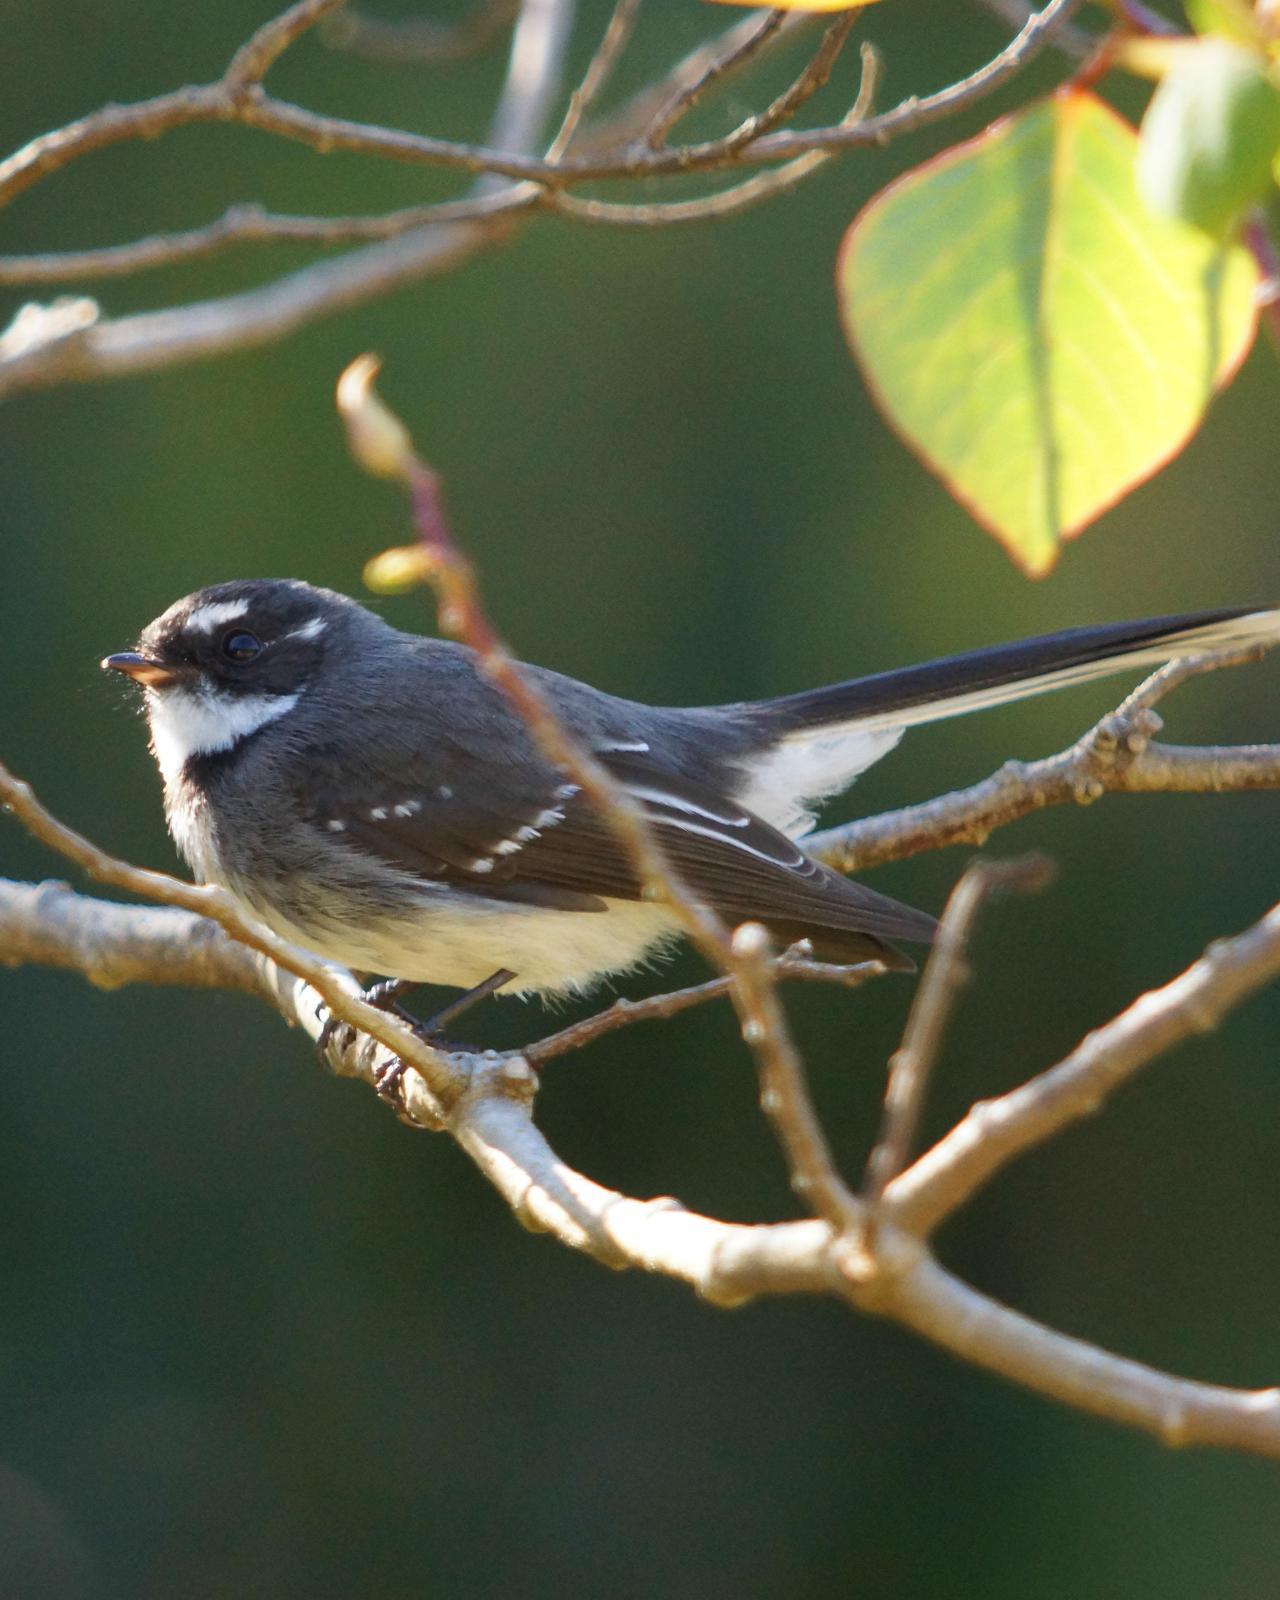 Gray Fantail Photo by Steve Percival